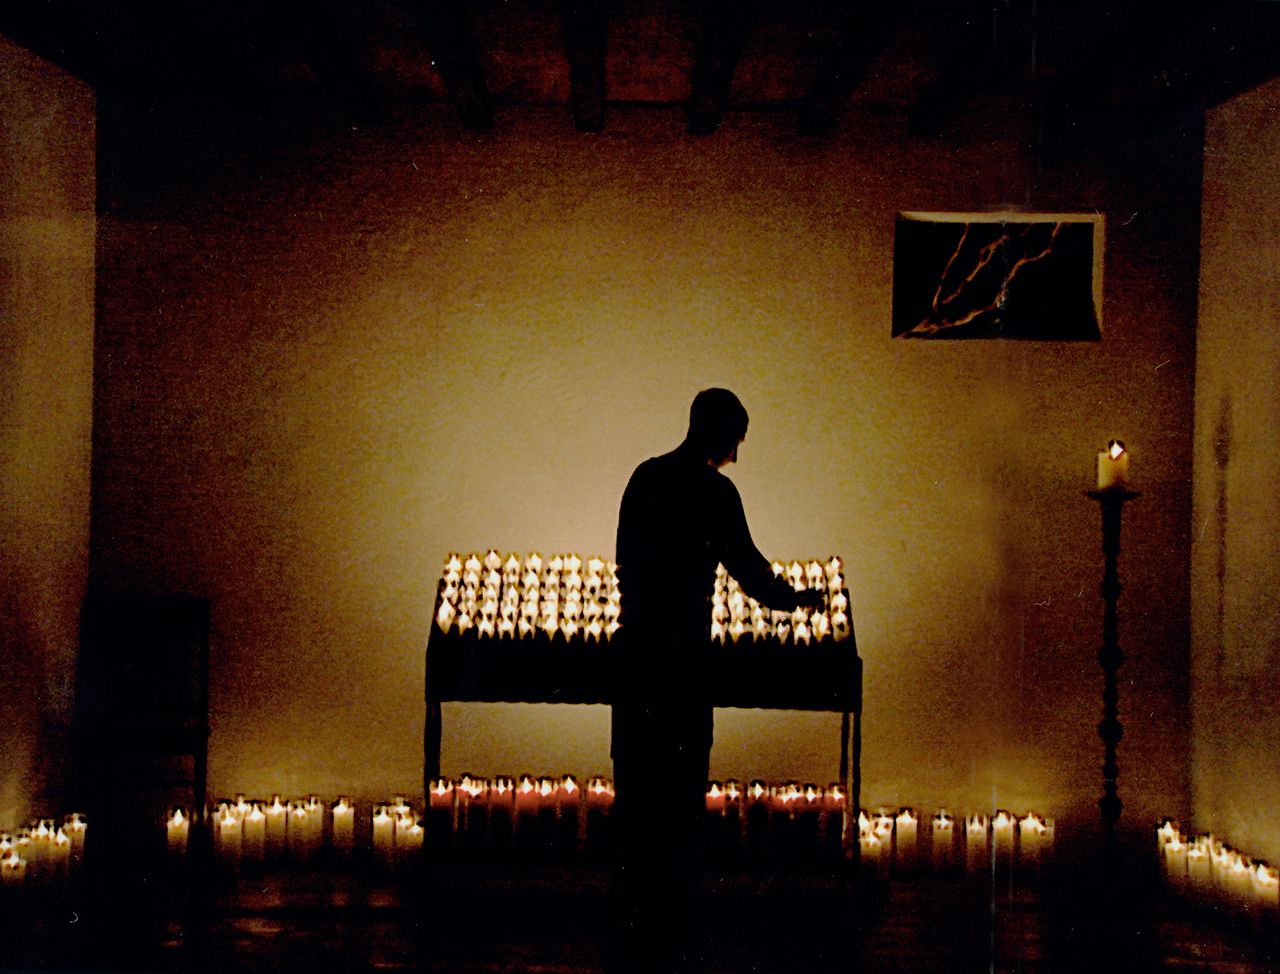 Man in a room lighting candles in silhouette